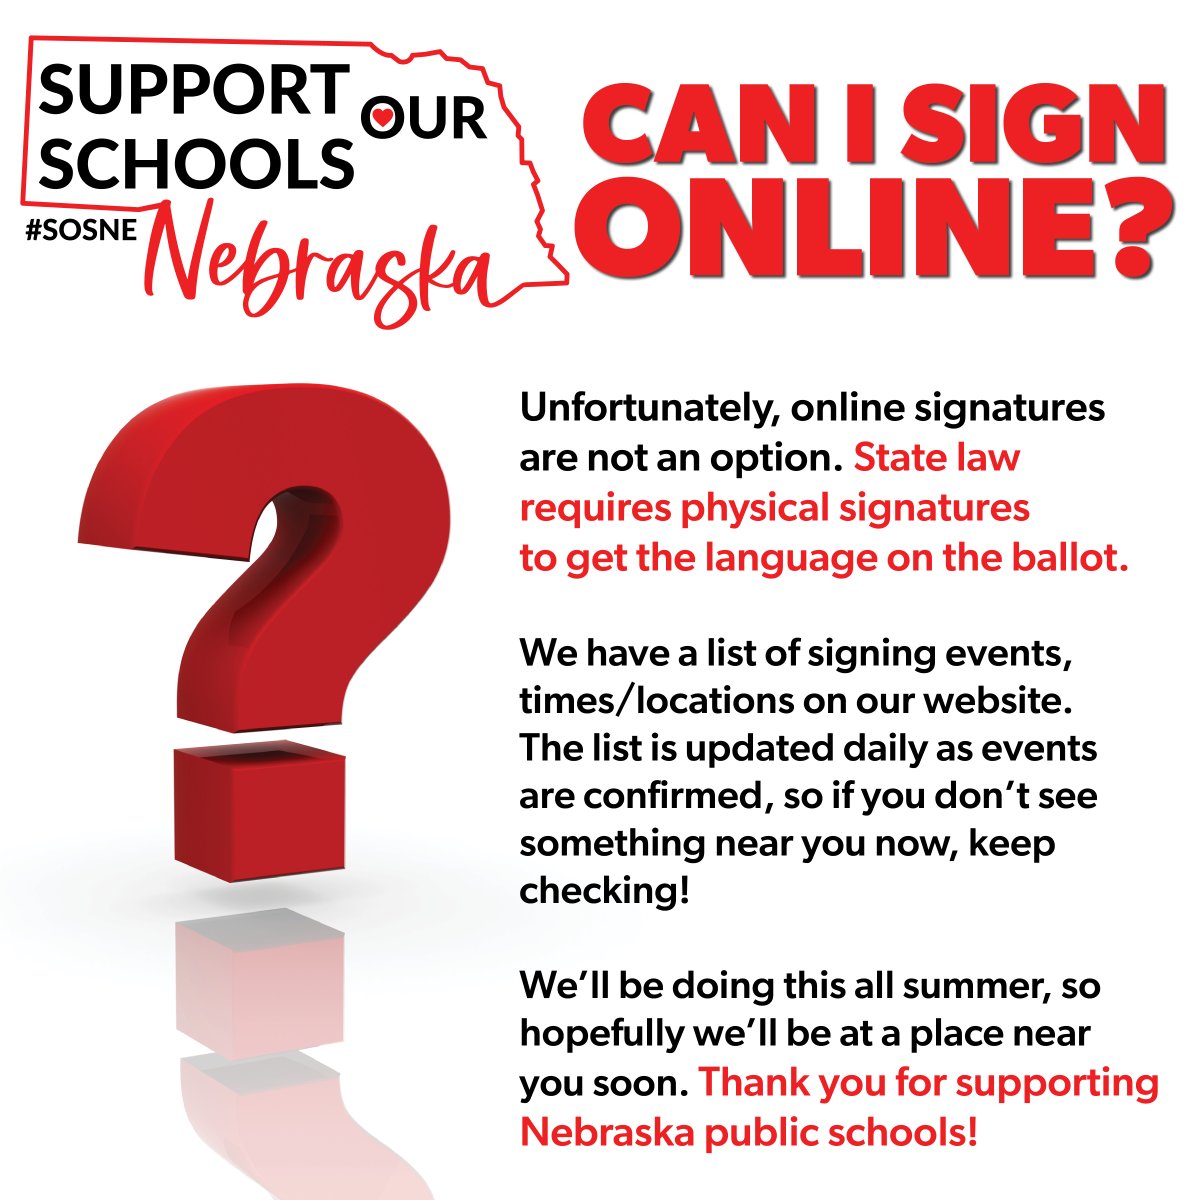 The most frequently asked question is, 'Where can I sign online?' Unfortunately, online signatures are not an option. State law requires physical signatures to get the language on the ballot. We update the info online as soon as events are confirmed, so please keep checking!